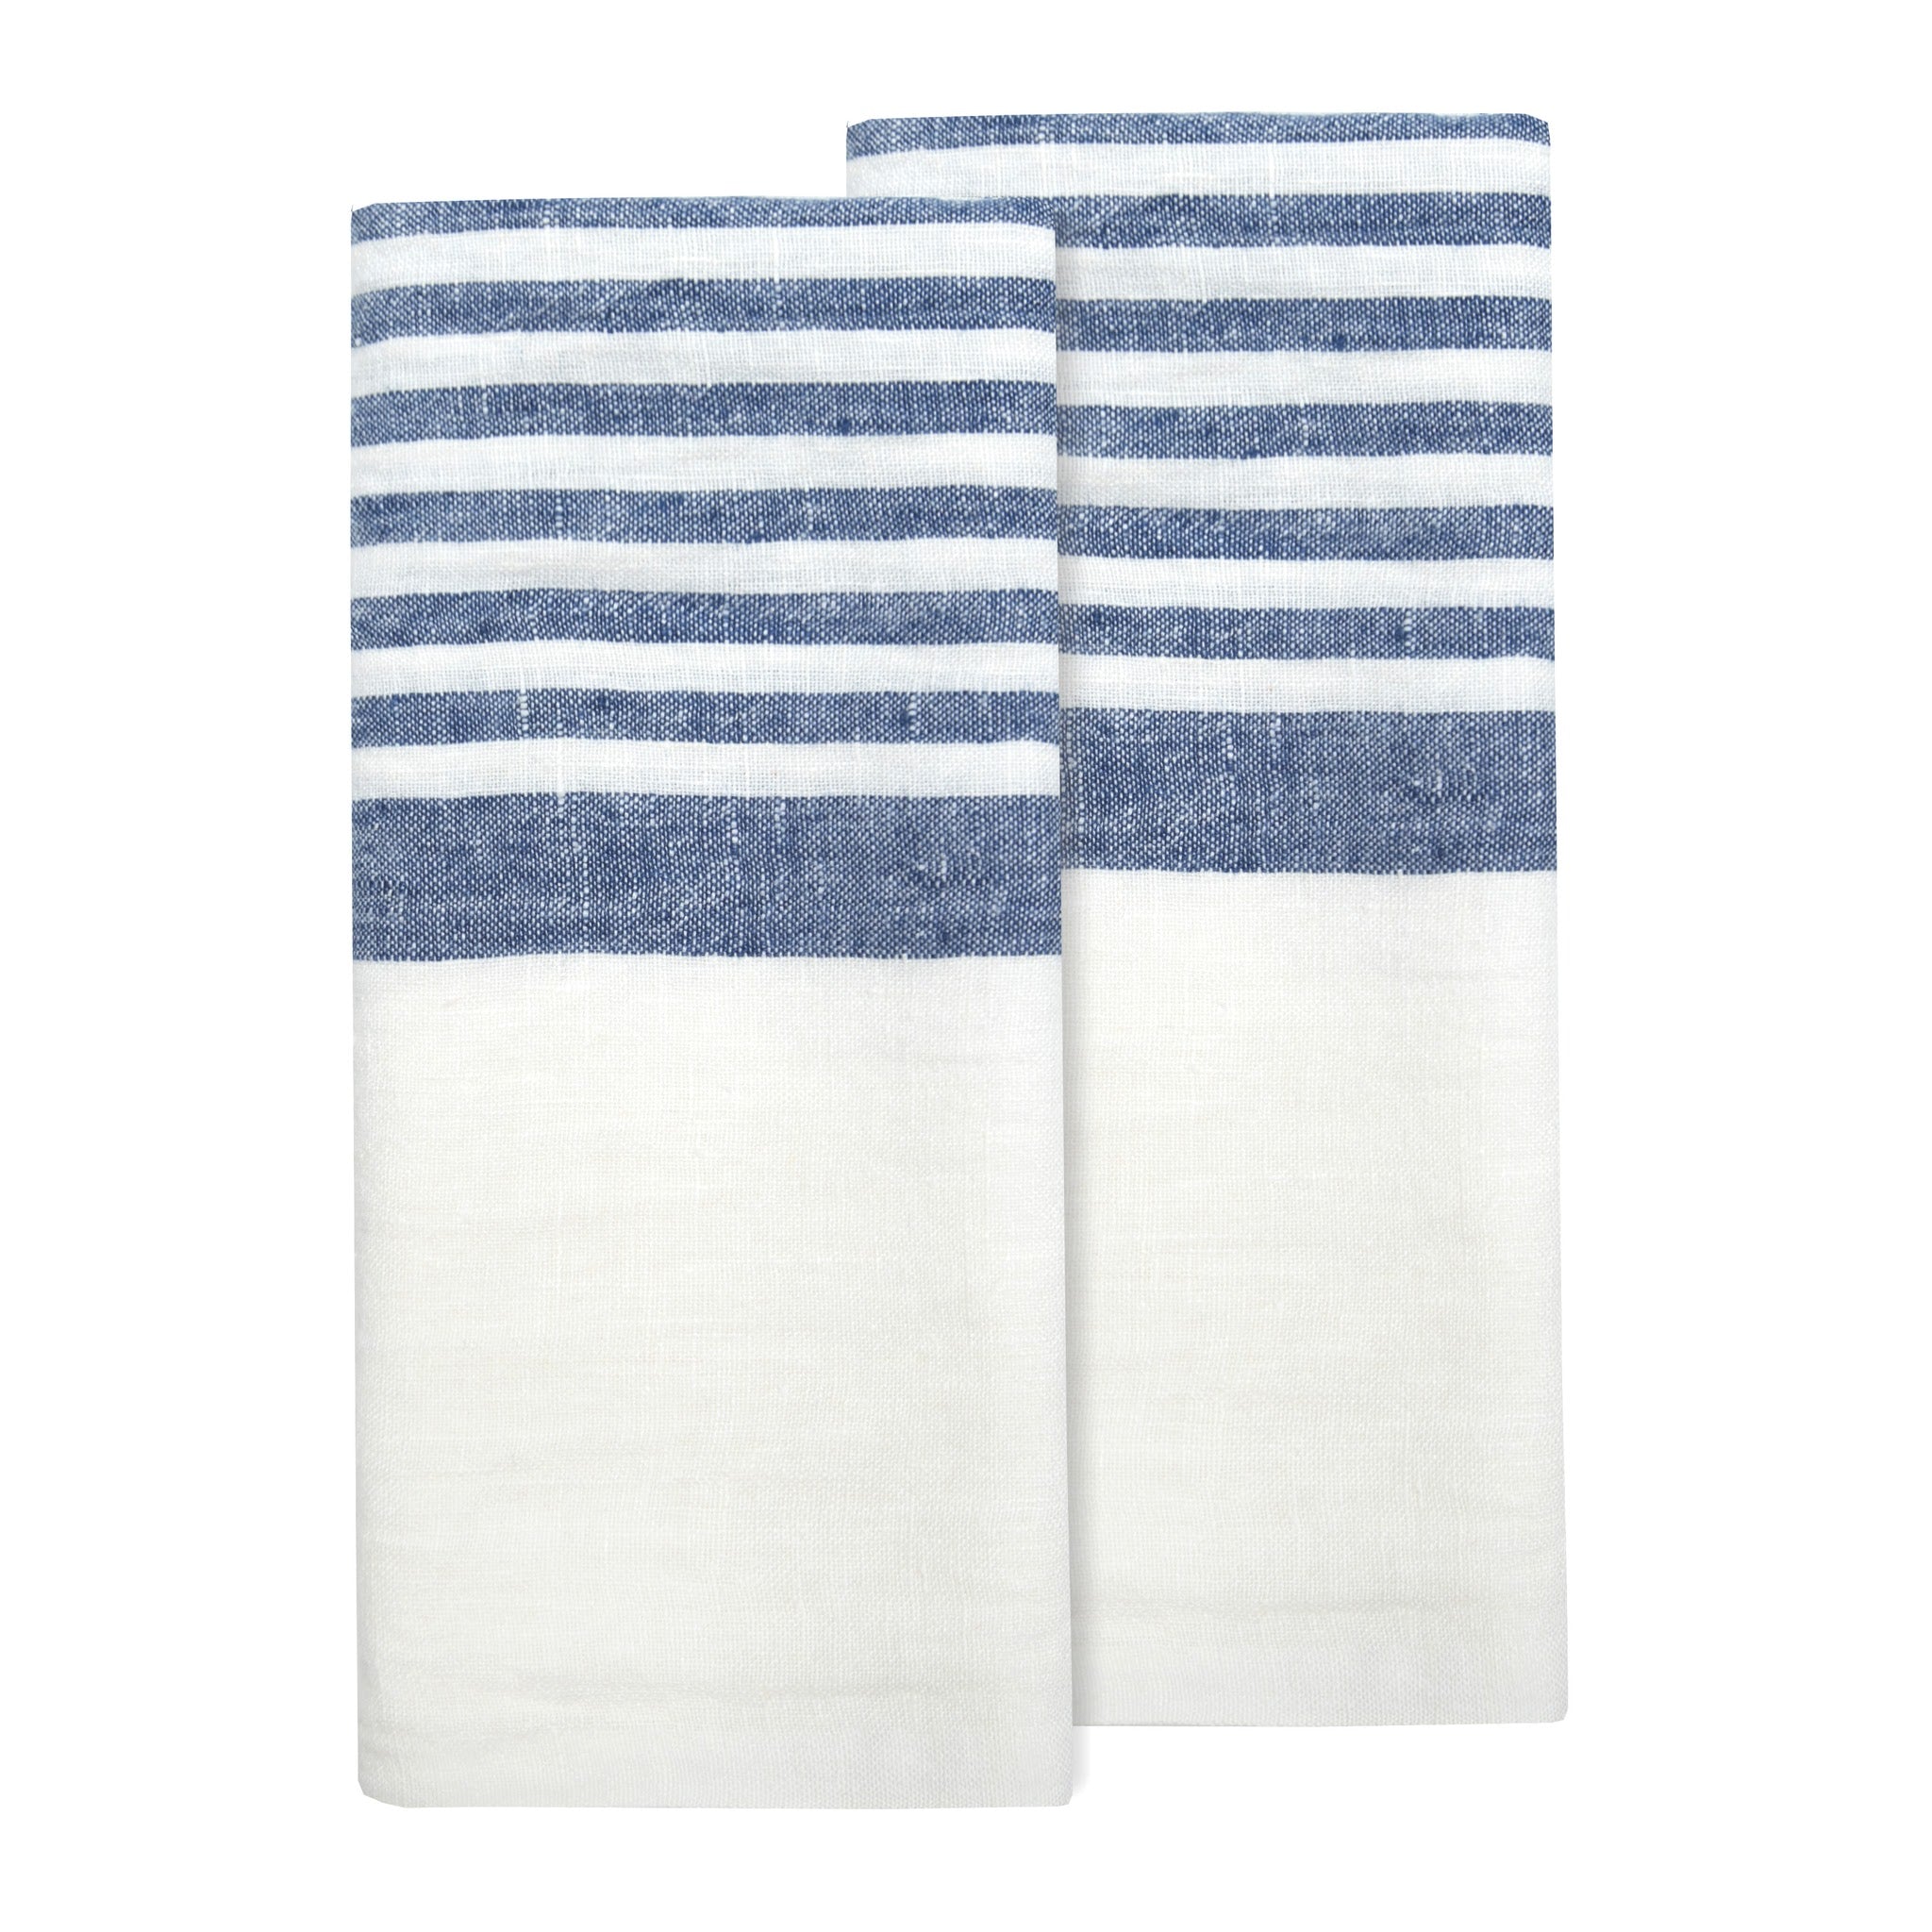 Brittany White Tea Towels 20x30 - Set of 2